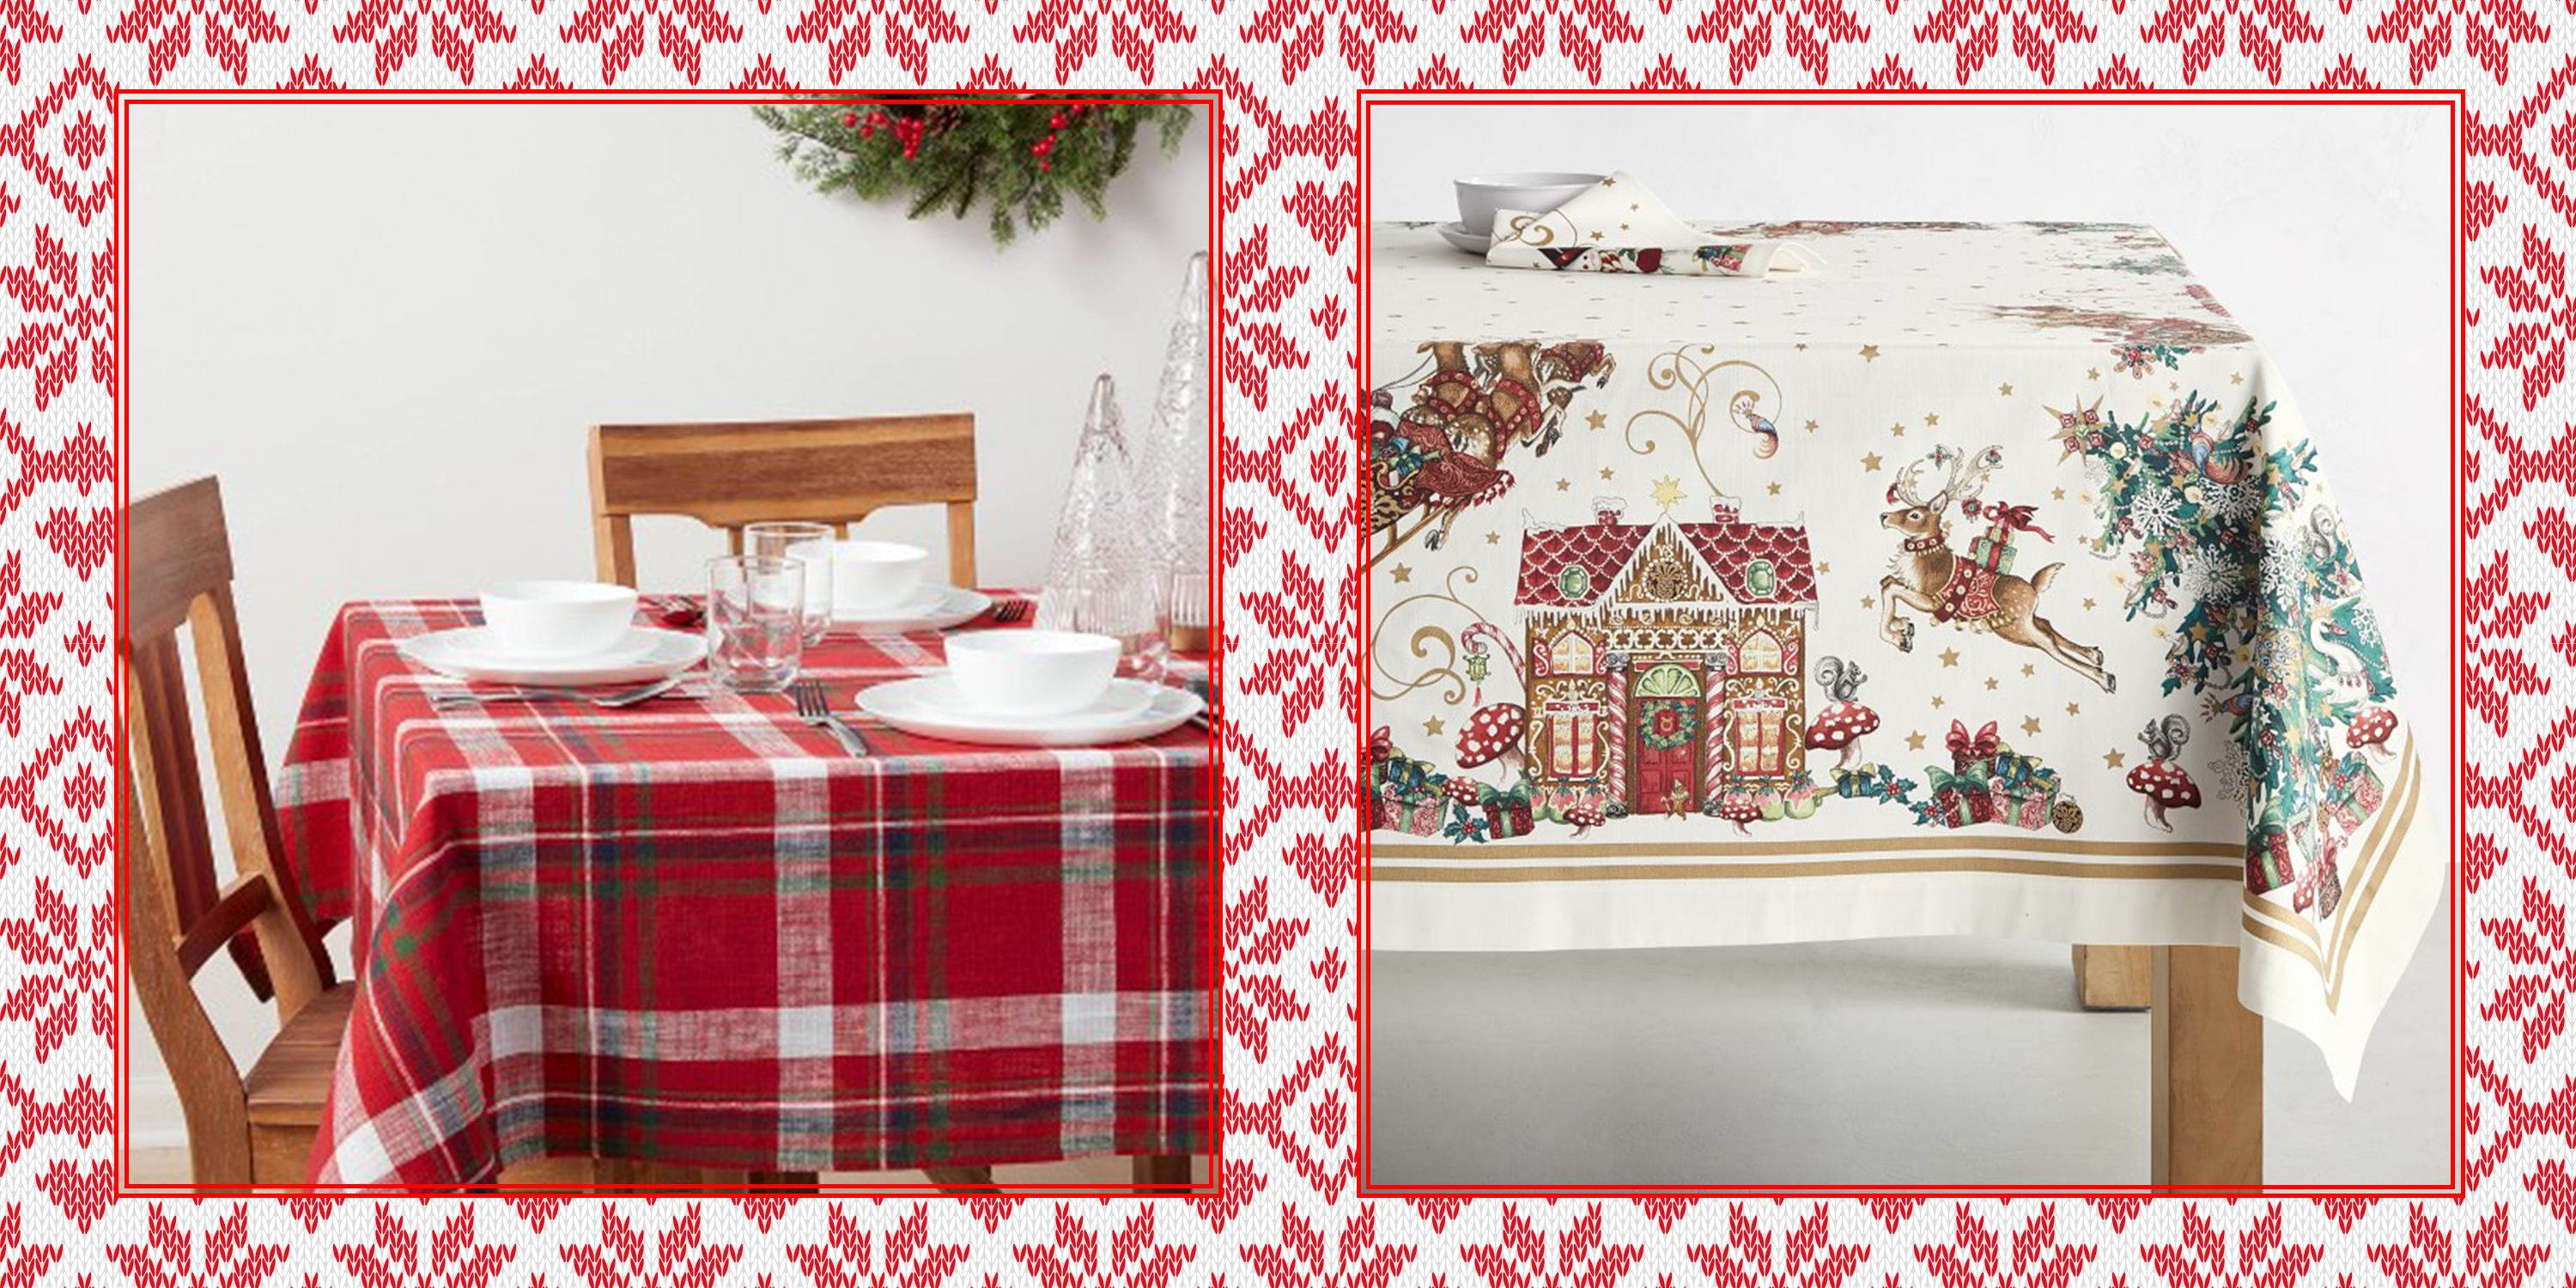 Winter Cardinal Bird Rectangle Table Cloth Linen Cover Placemat 60 W x 90 L for Kitchen Dining Room Party Wedding Wamika Christmas Tree Snowflake Tablecloth Table Cover Mat Home Decoration